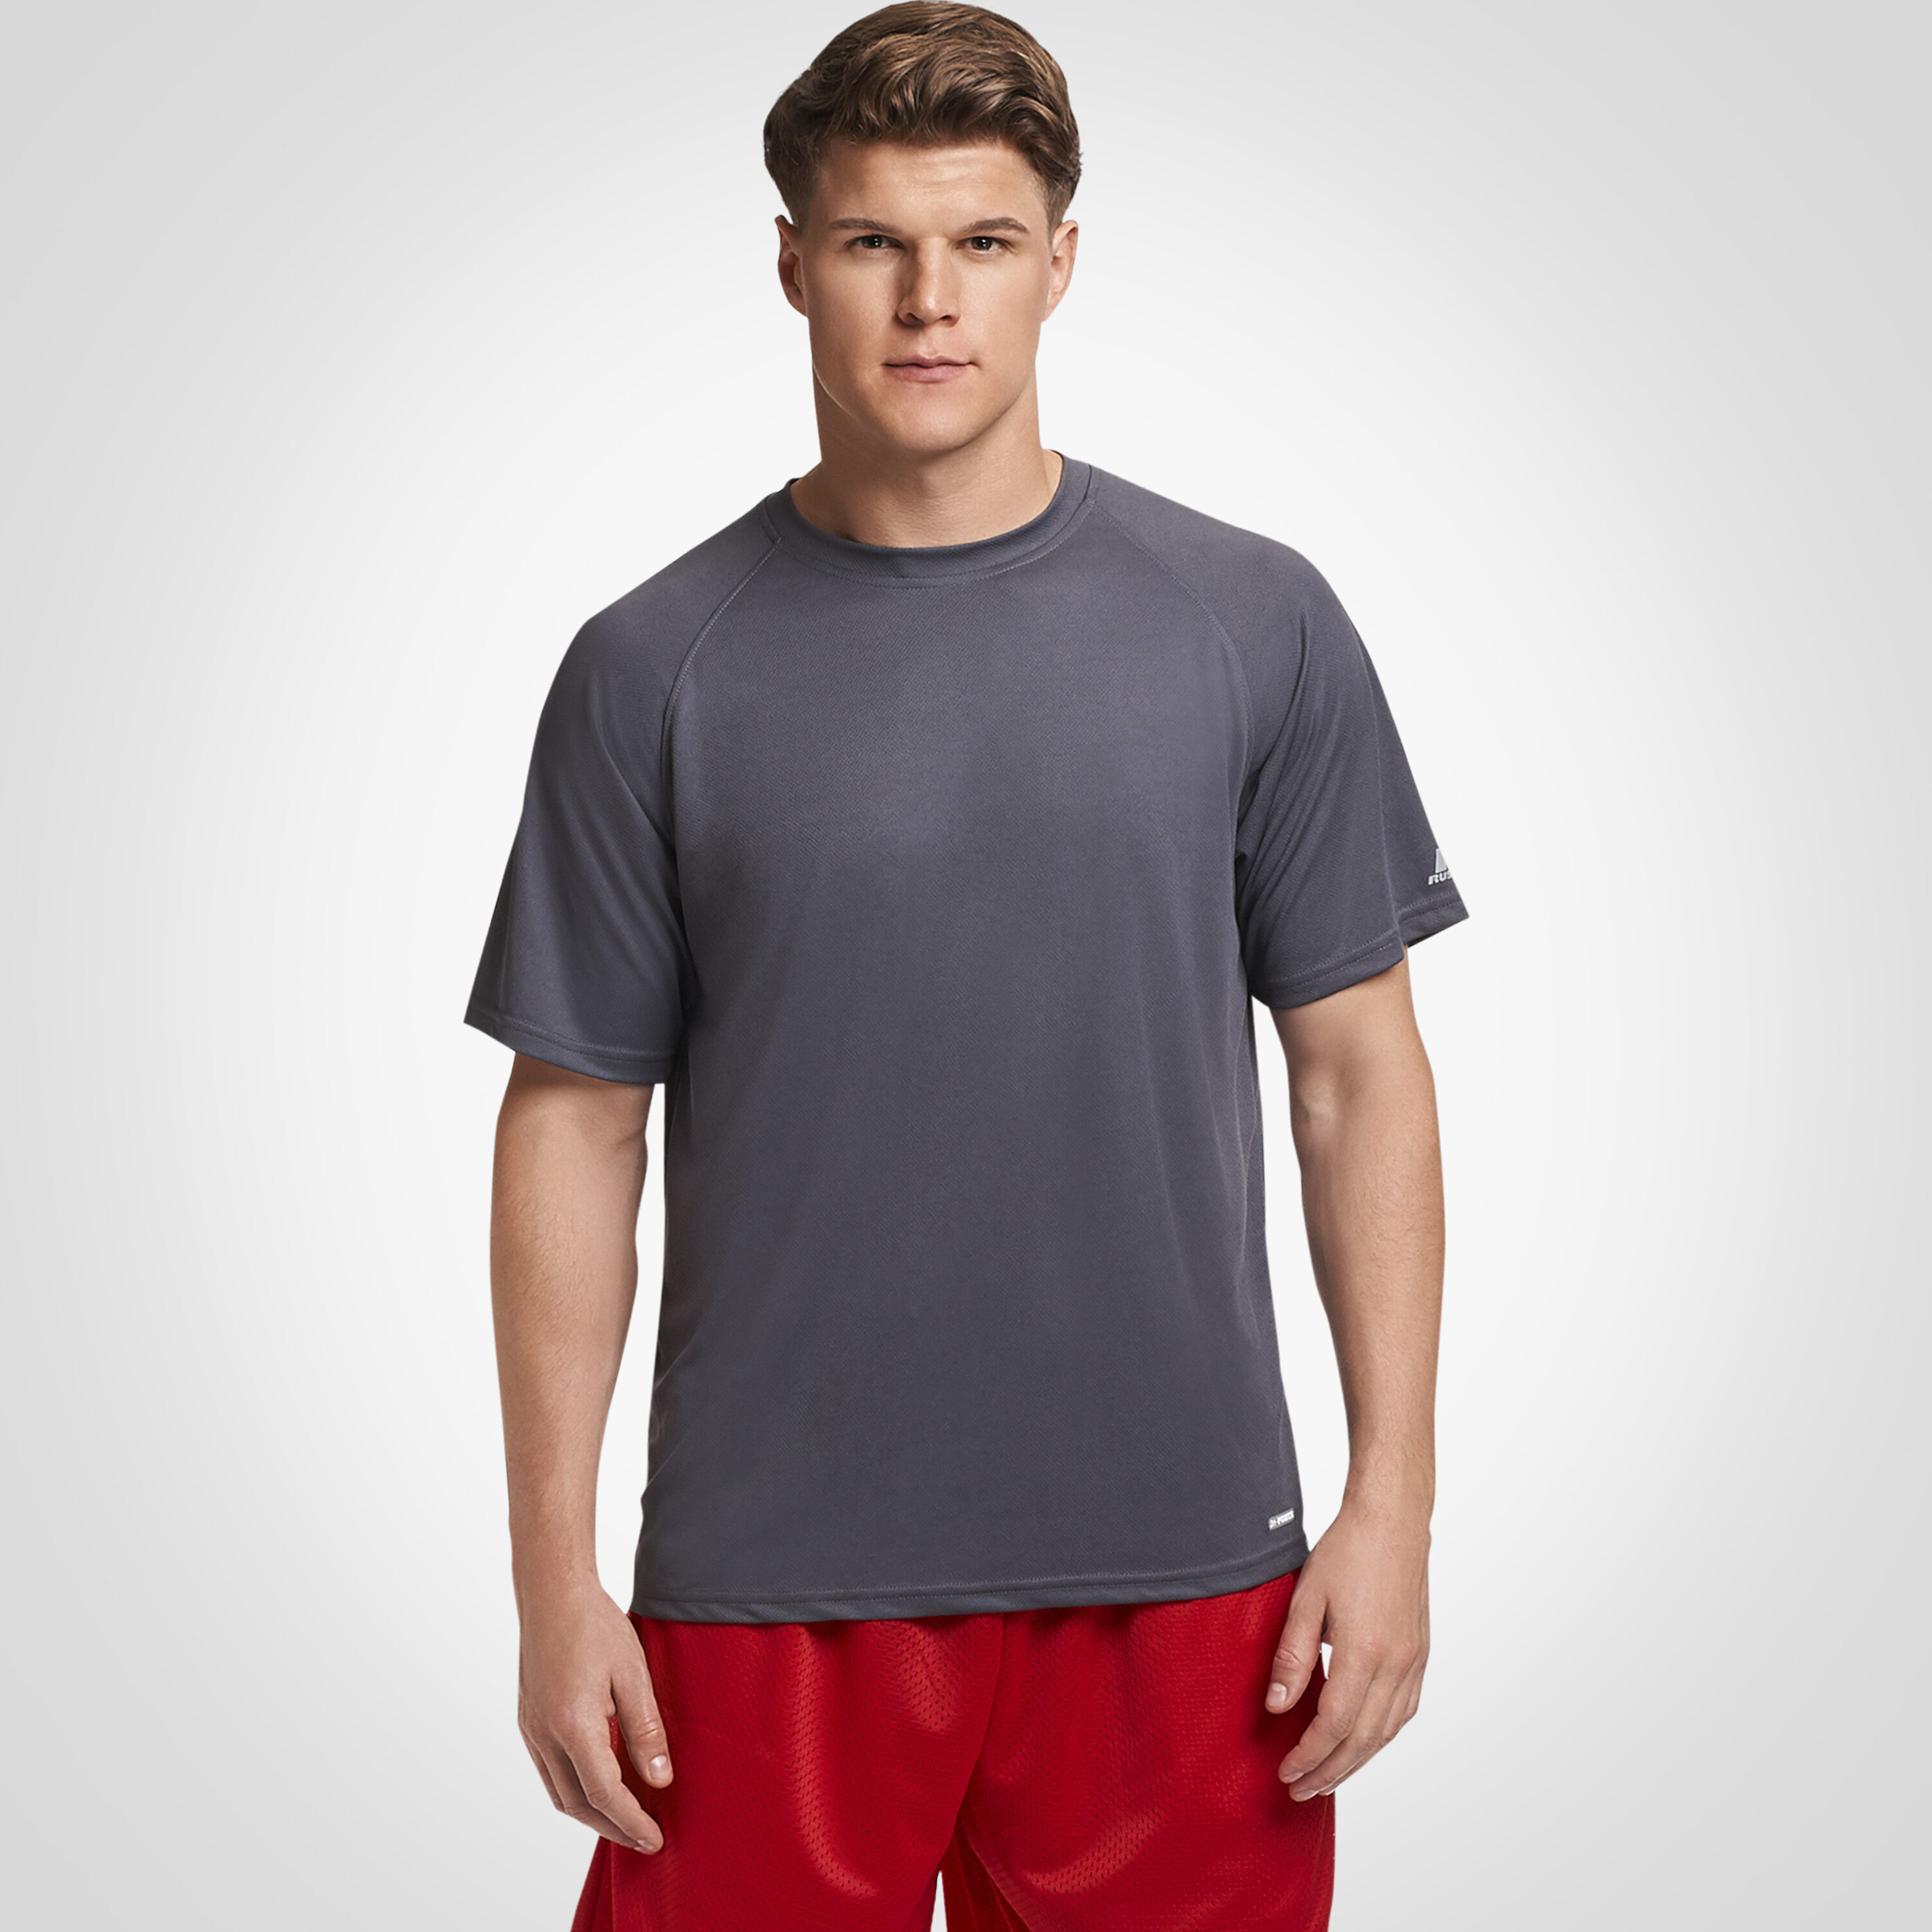 russell athletic men's t shirts